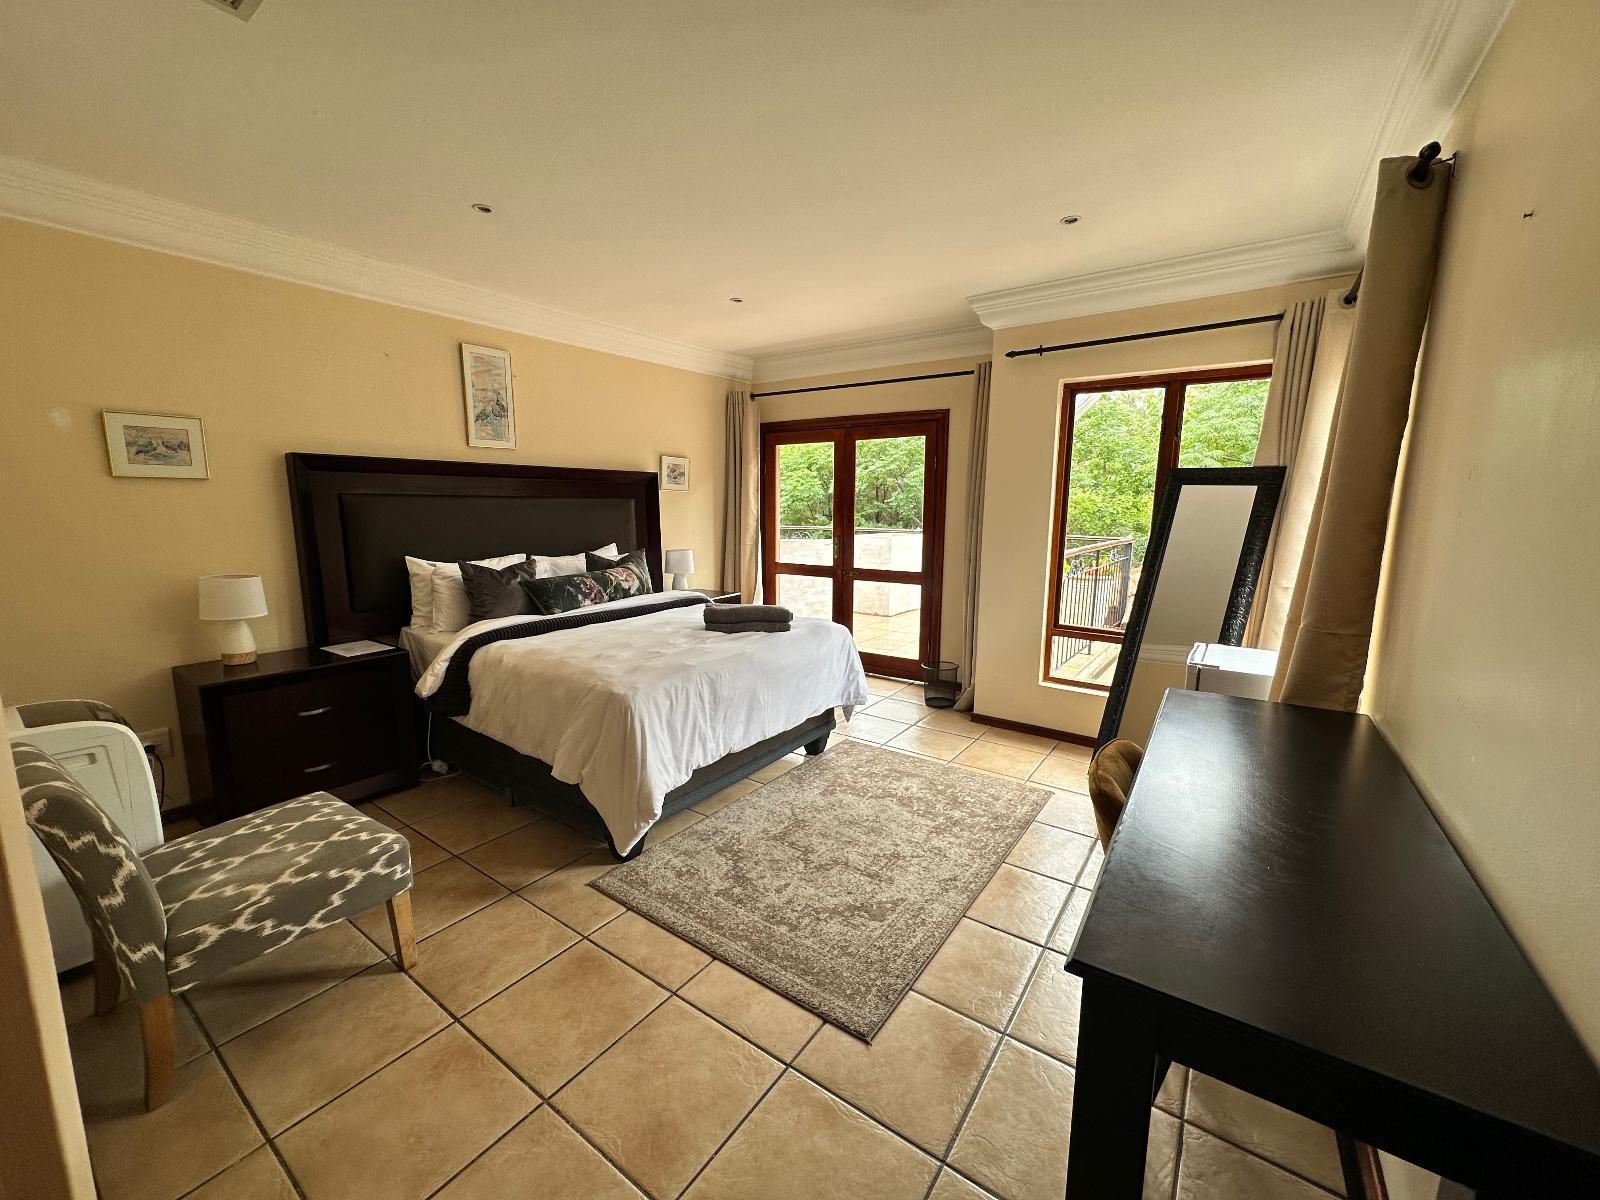 37 On Eagles Pecanwood Estate Hartbeespoort North West Province South Africa Sepia Tones, Bedroom